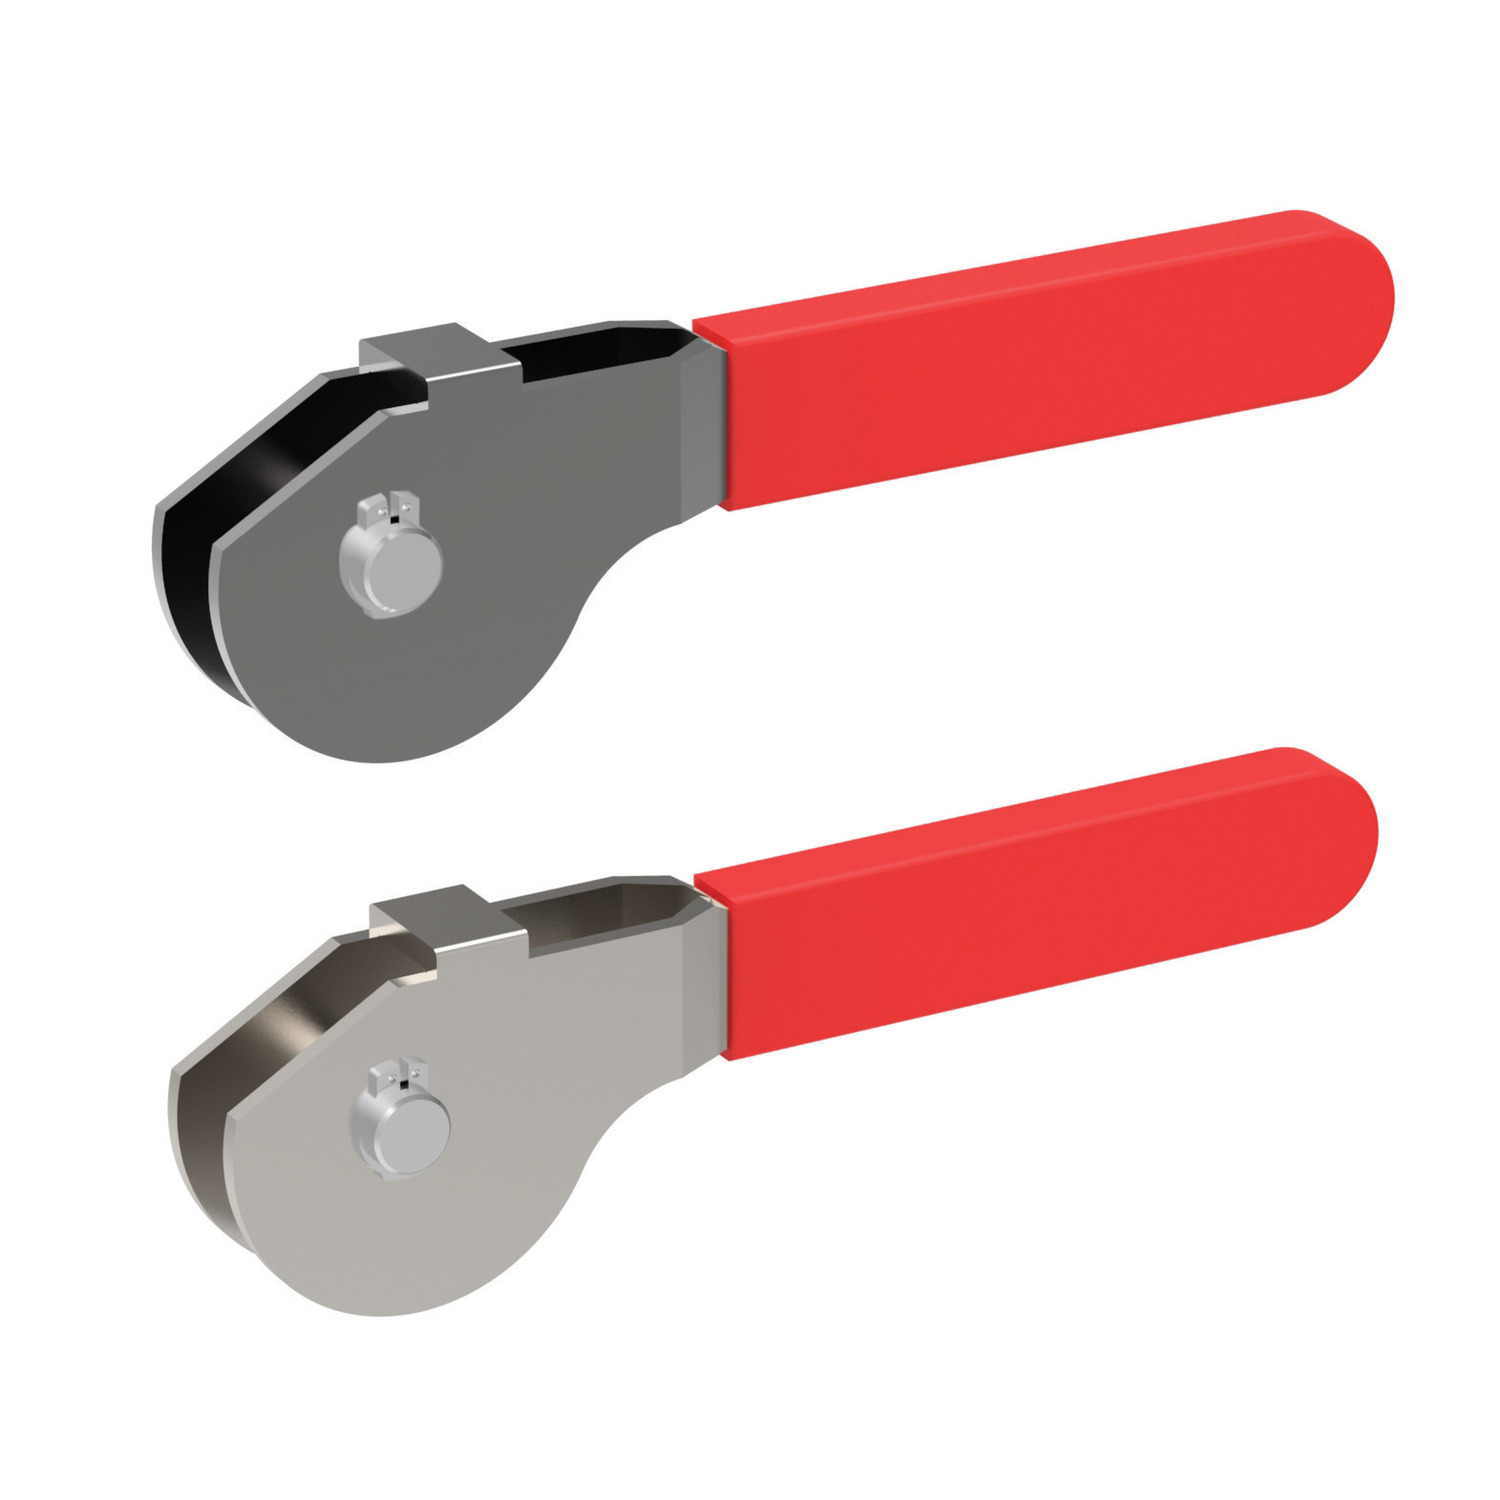 Cam Levers - Double Surface Double surface eccentric levers with fulcrum pin. Available in steel or stainless steel and supplied with pvc handle.